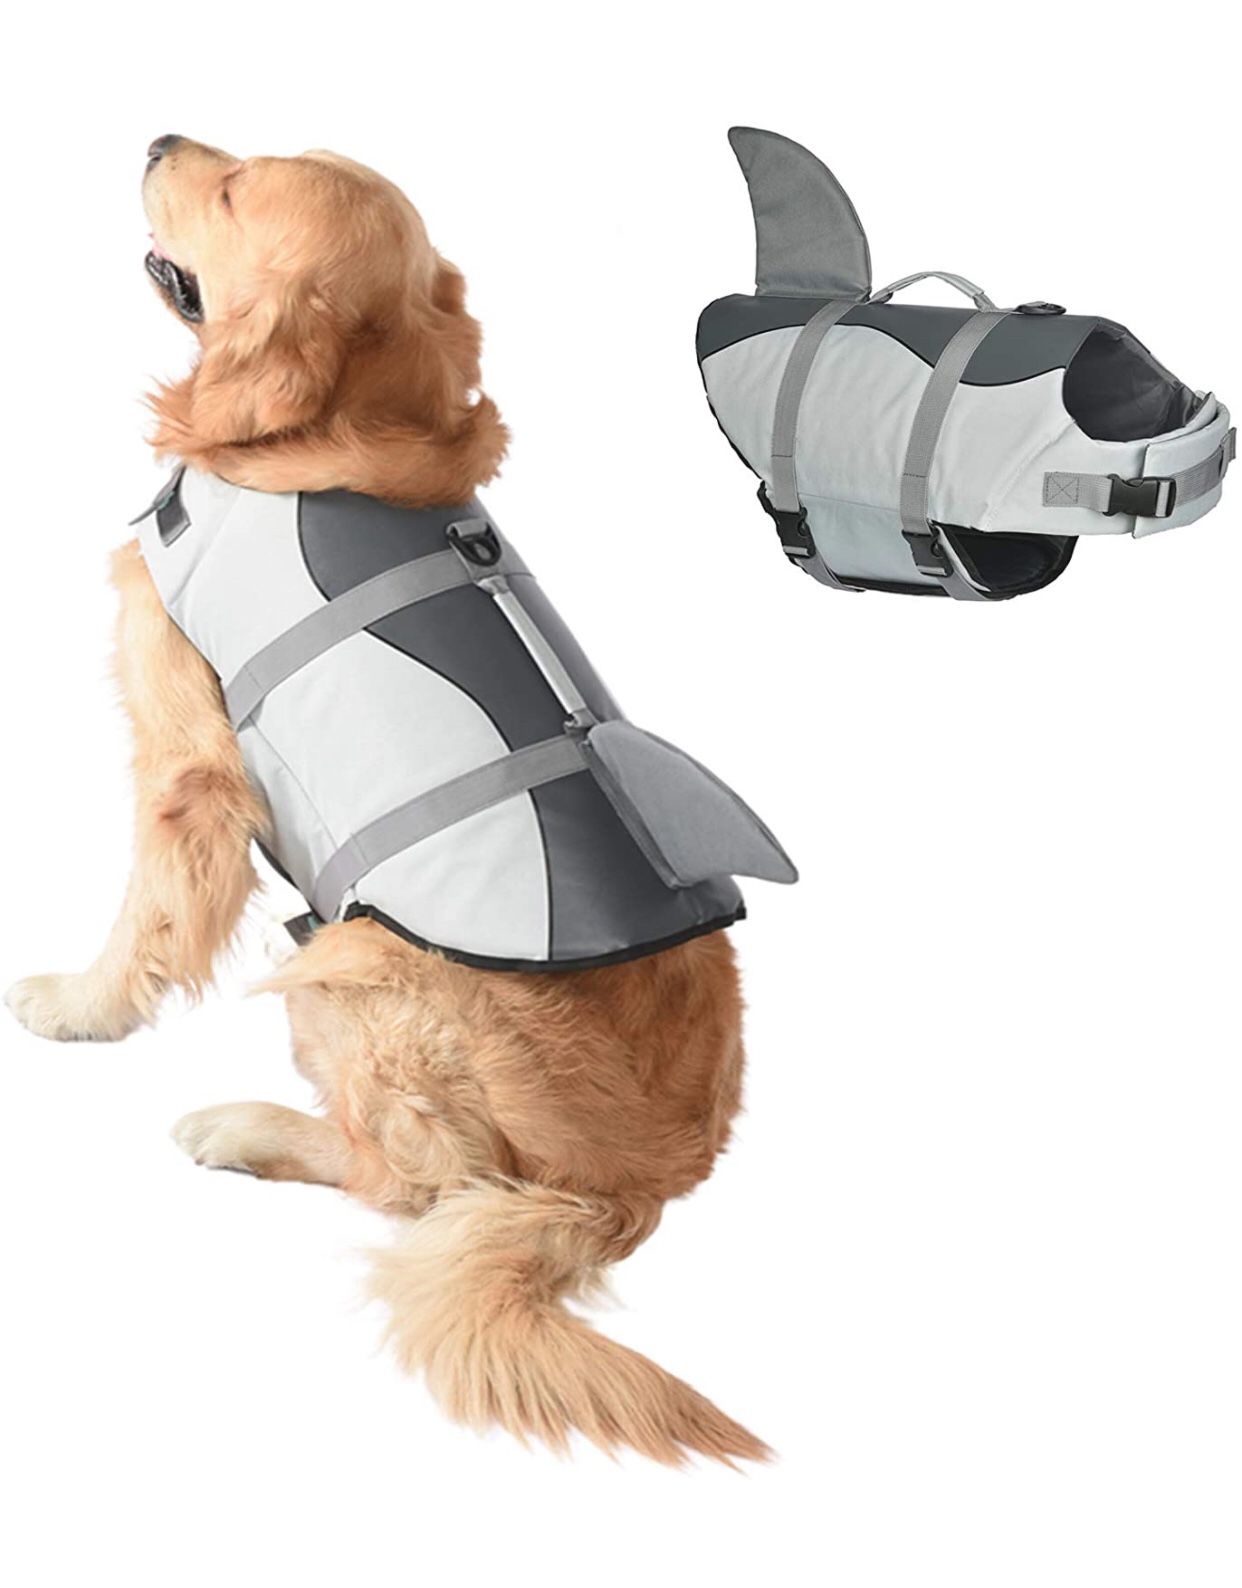 Dog Shark Life, Jacket Dog Life Vest for Swimming, Pet Life Preserver with Rescue Handle, Size L